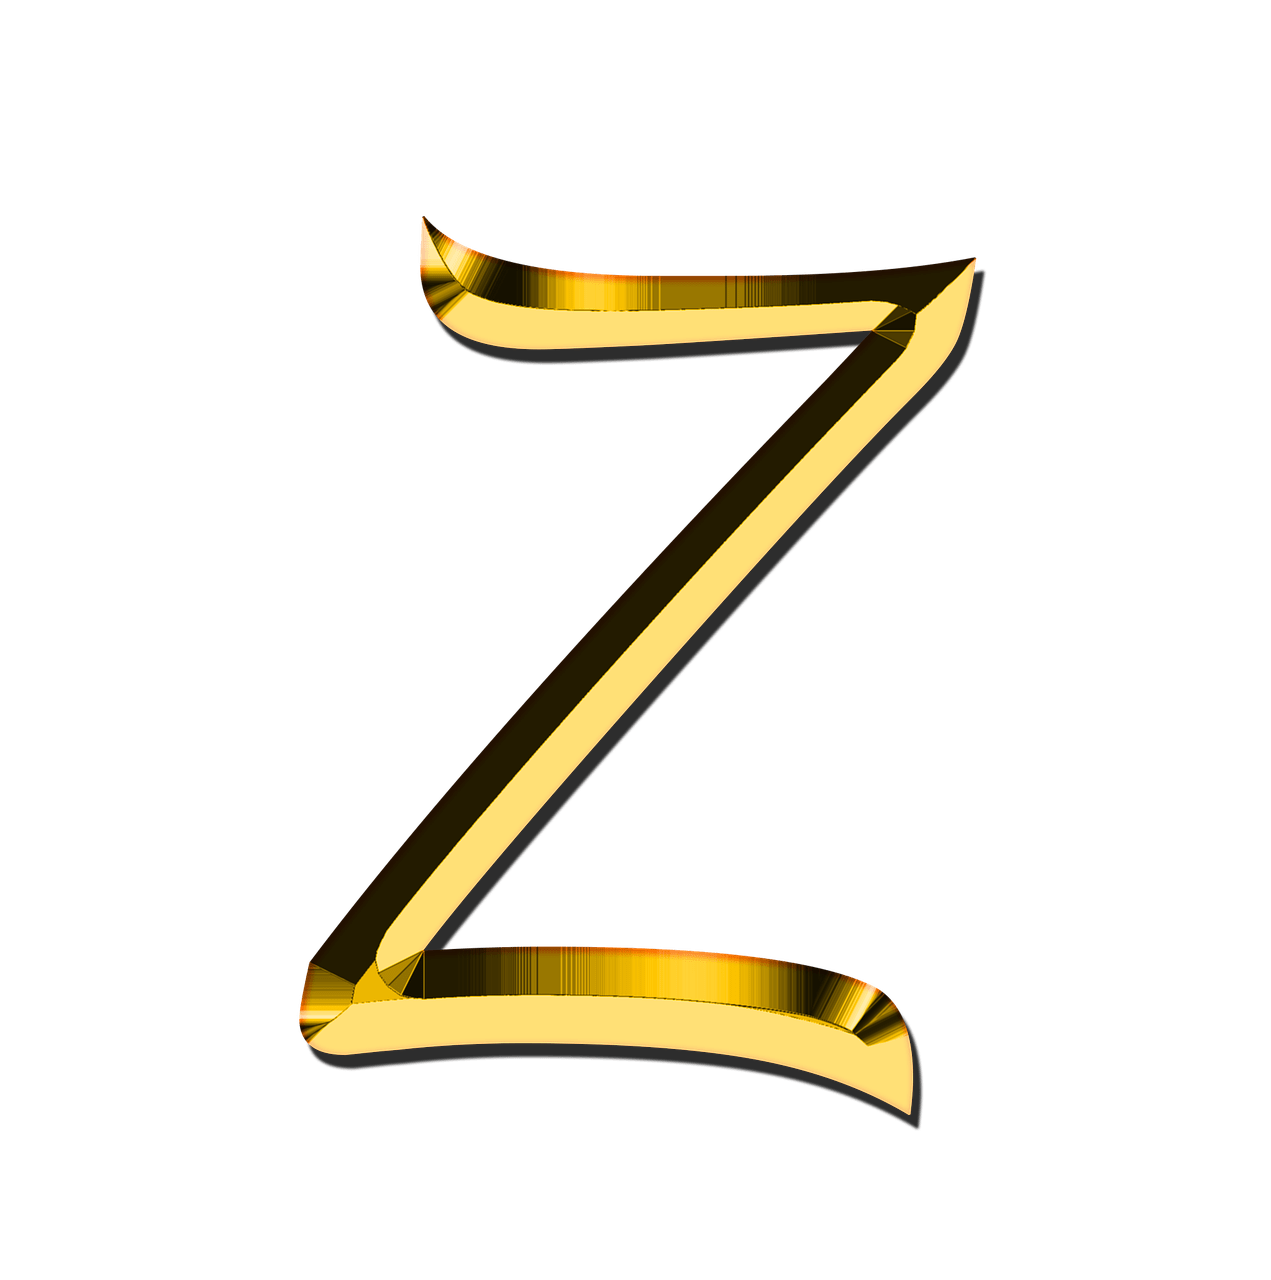 Z Letter HD Image Free PNG Image